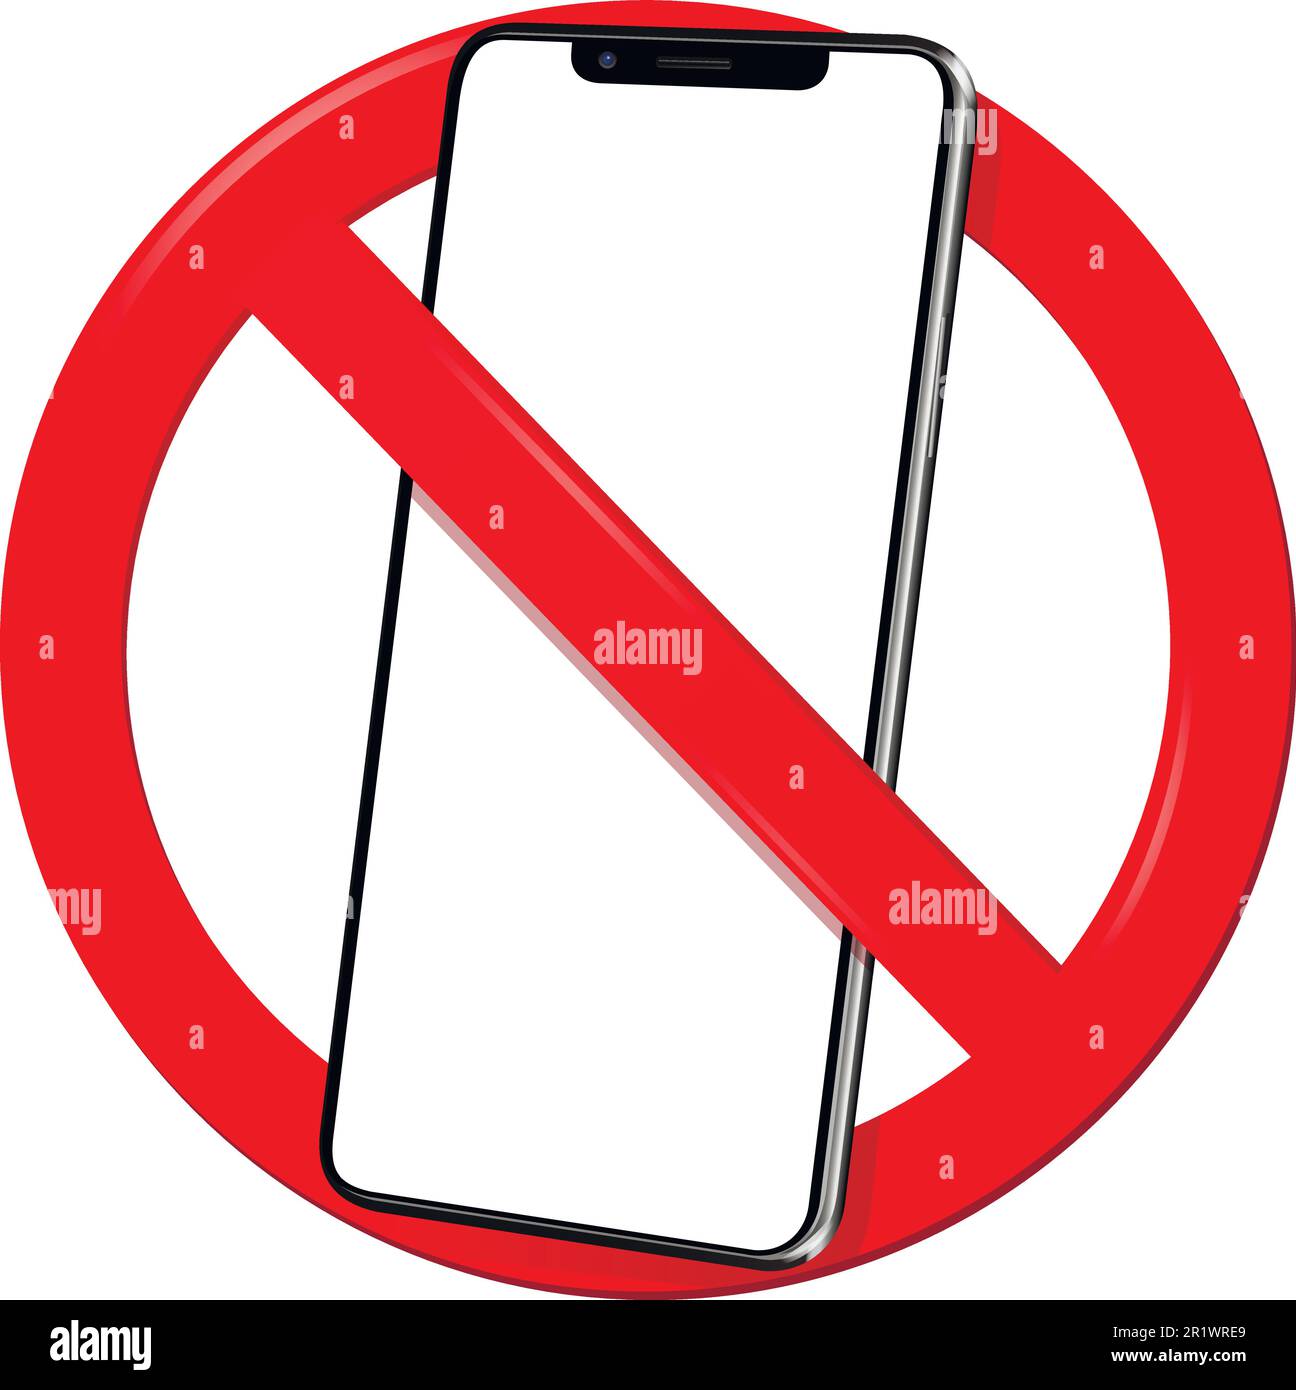 Phone Forbidden Sign Photography Prohibited Photo Ban Icon With Camera And  Mobile Stop Symbol Of Use Cellphone Call Smartphone Do Video Area Of  Warning About Telephone Off Logo Of Mute Vector Stock